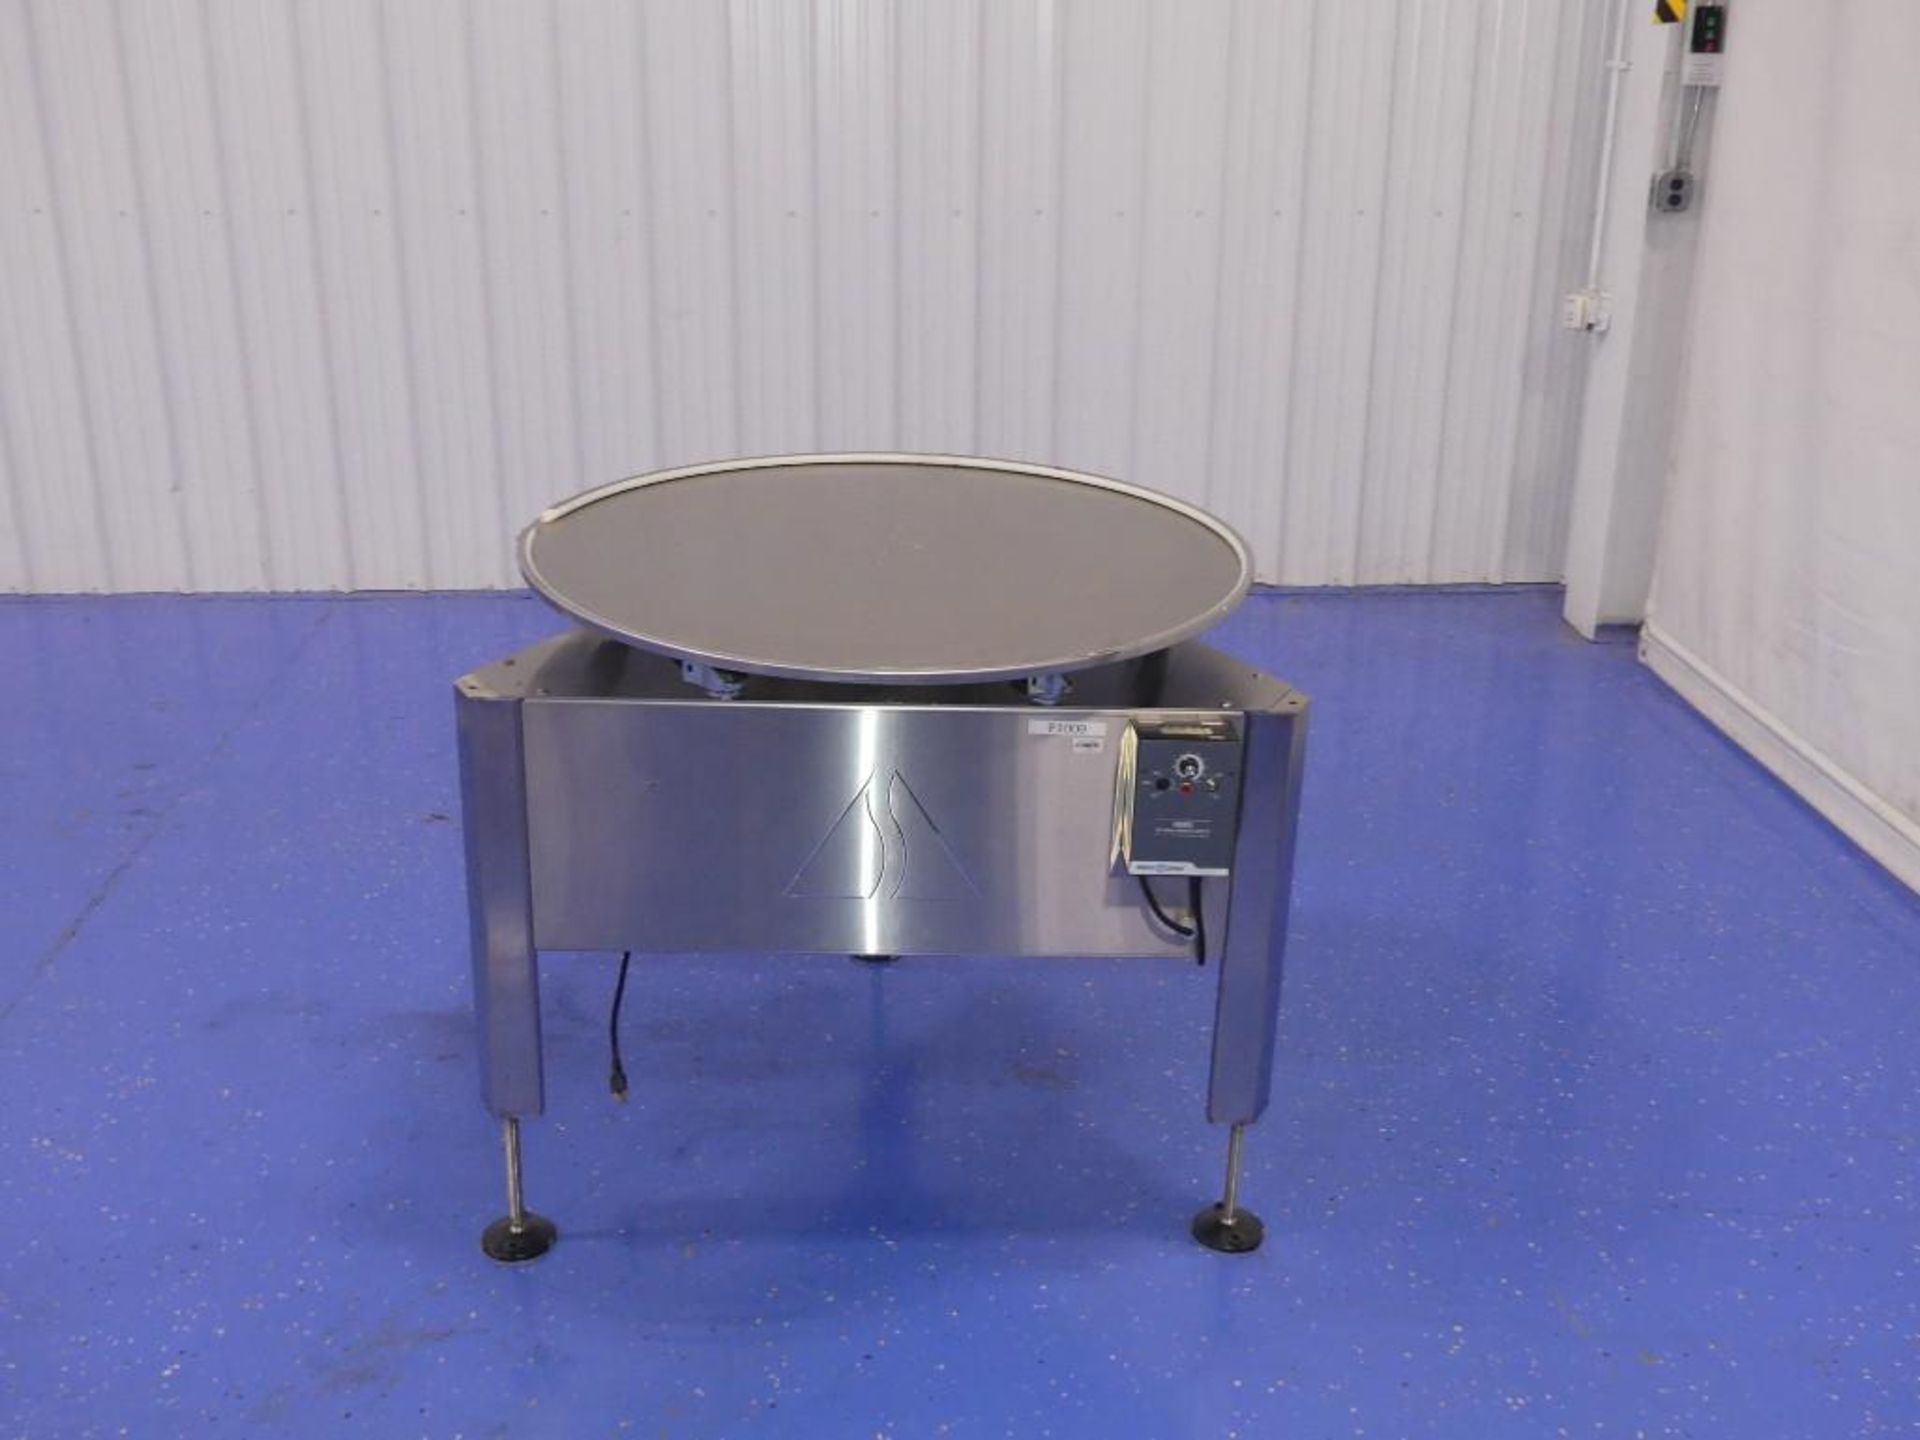 40" Rotary Accumulation Table